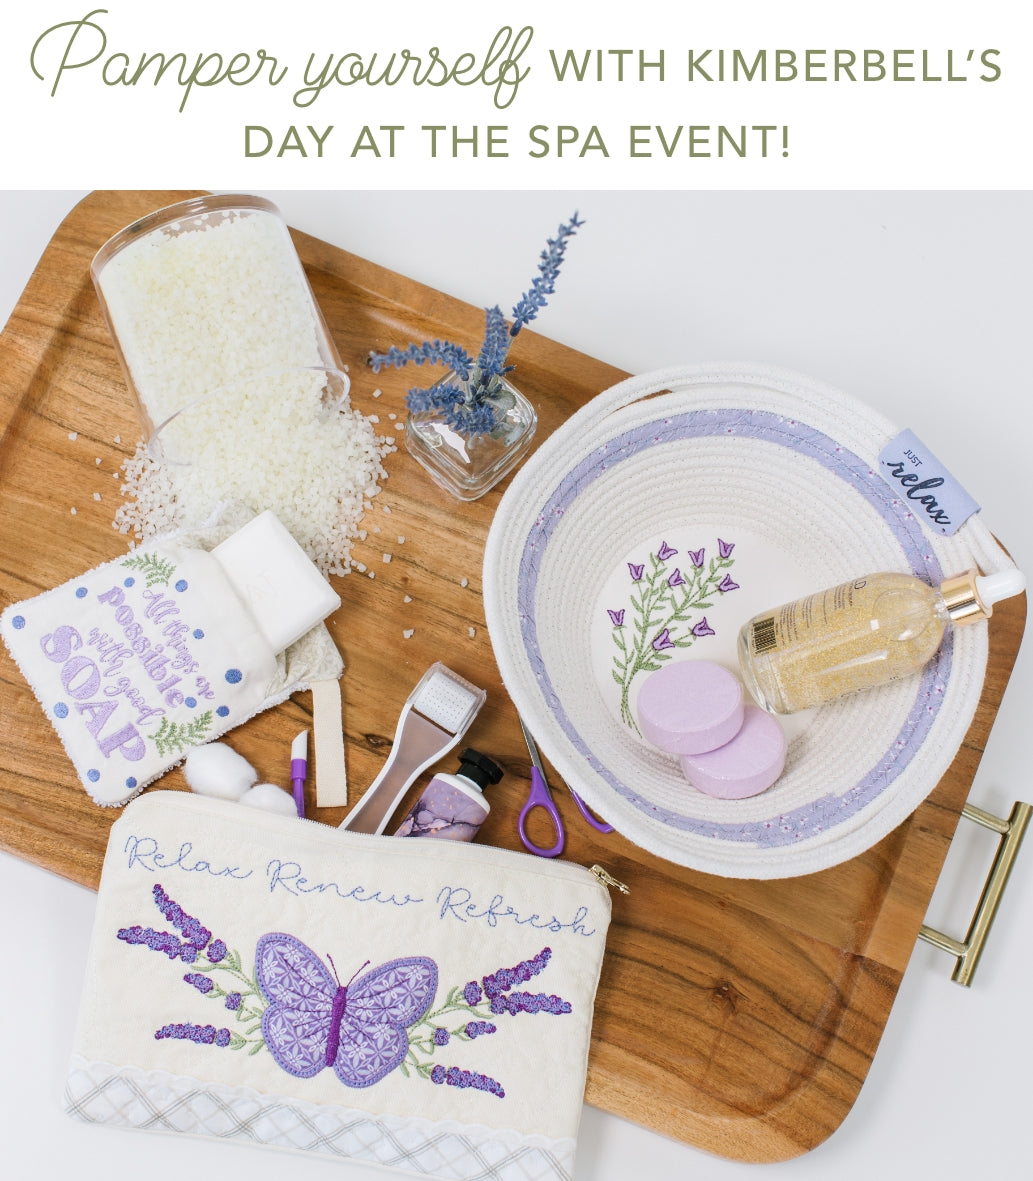 DAY AT THE SPA SAT. MAY 18 10:00 - 4:00  KIMBERBELL EVENT - IN PERSON